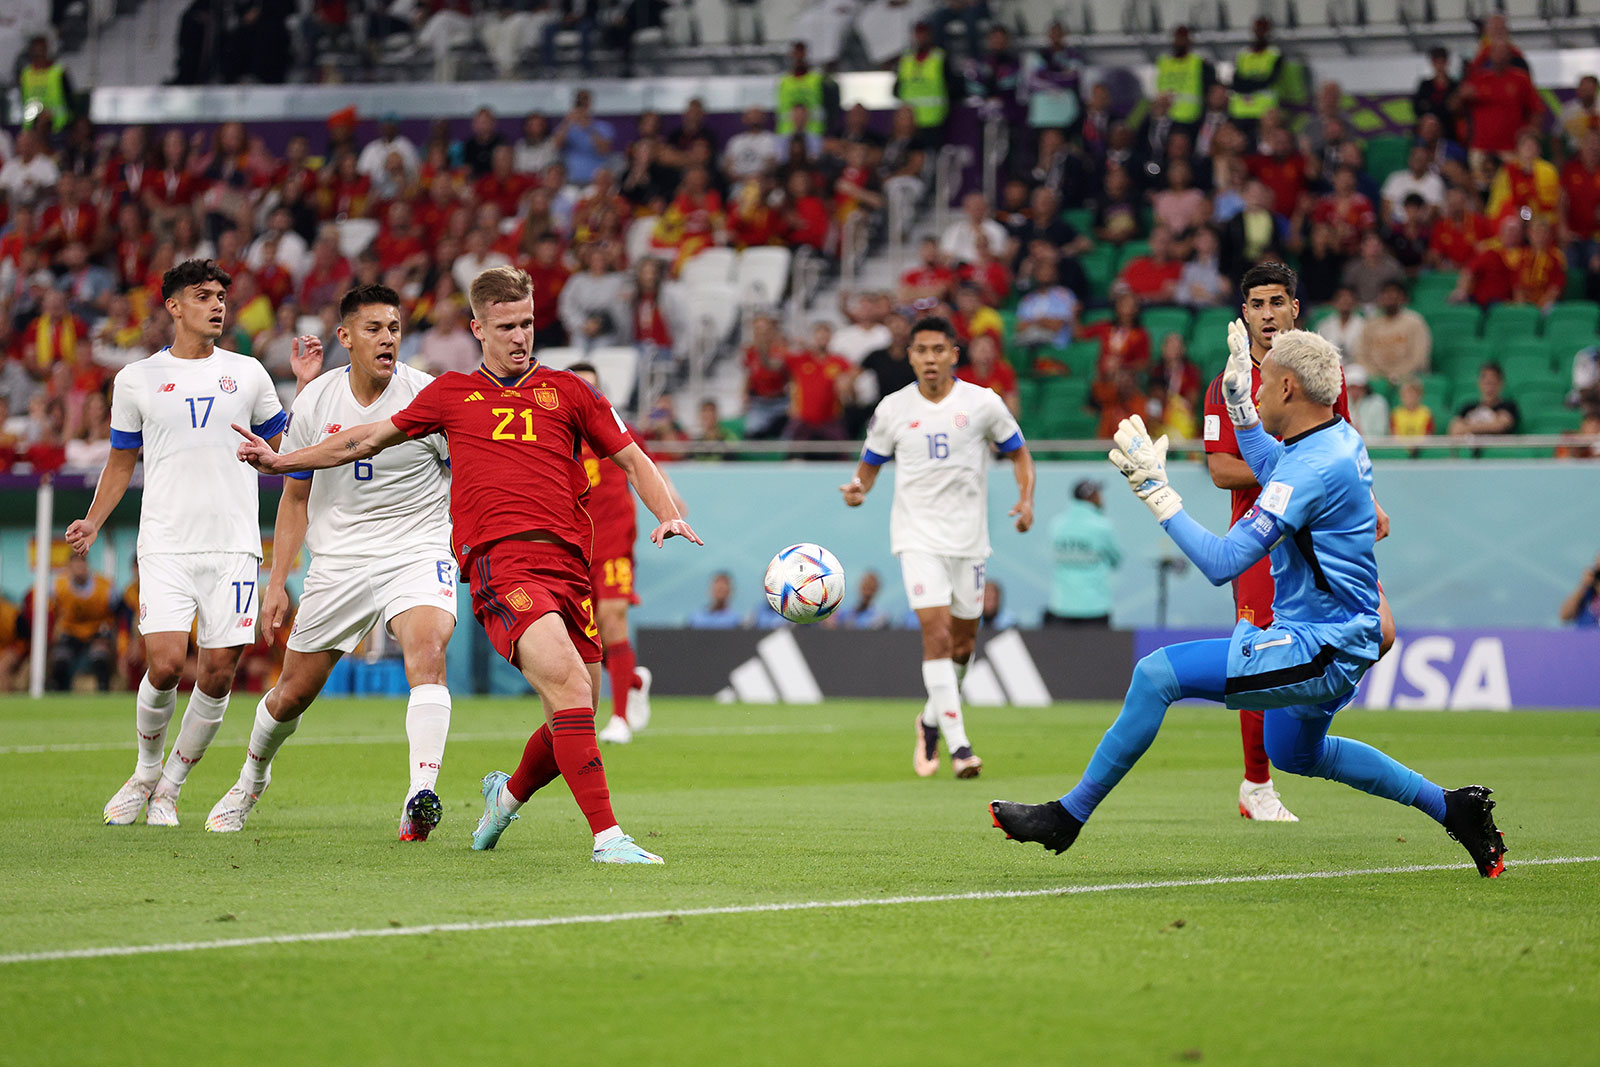 Dani Olmo of Spain scores their team's first goal during the match against Costa Rica on November 23.